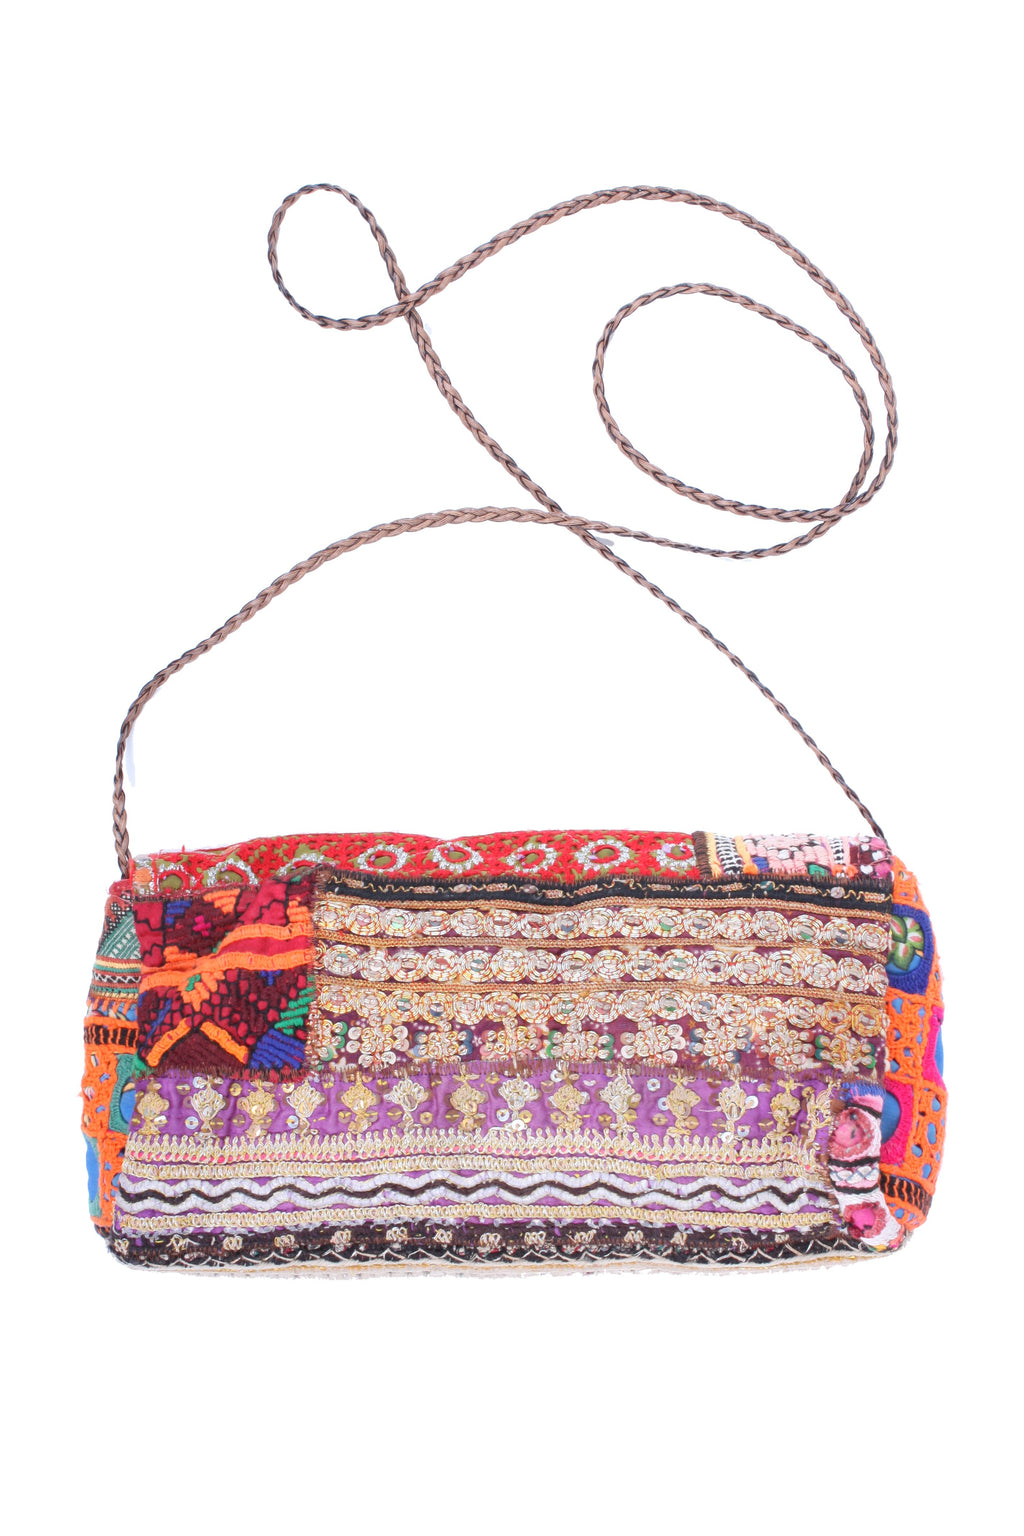 Vintage Embroidered Clutch